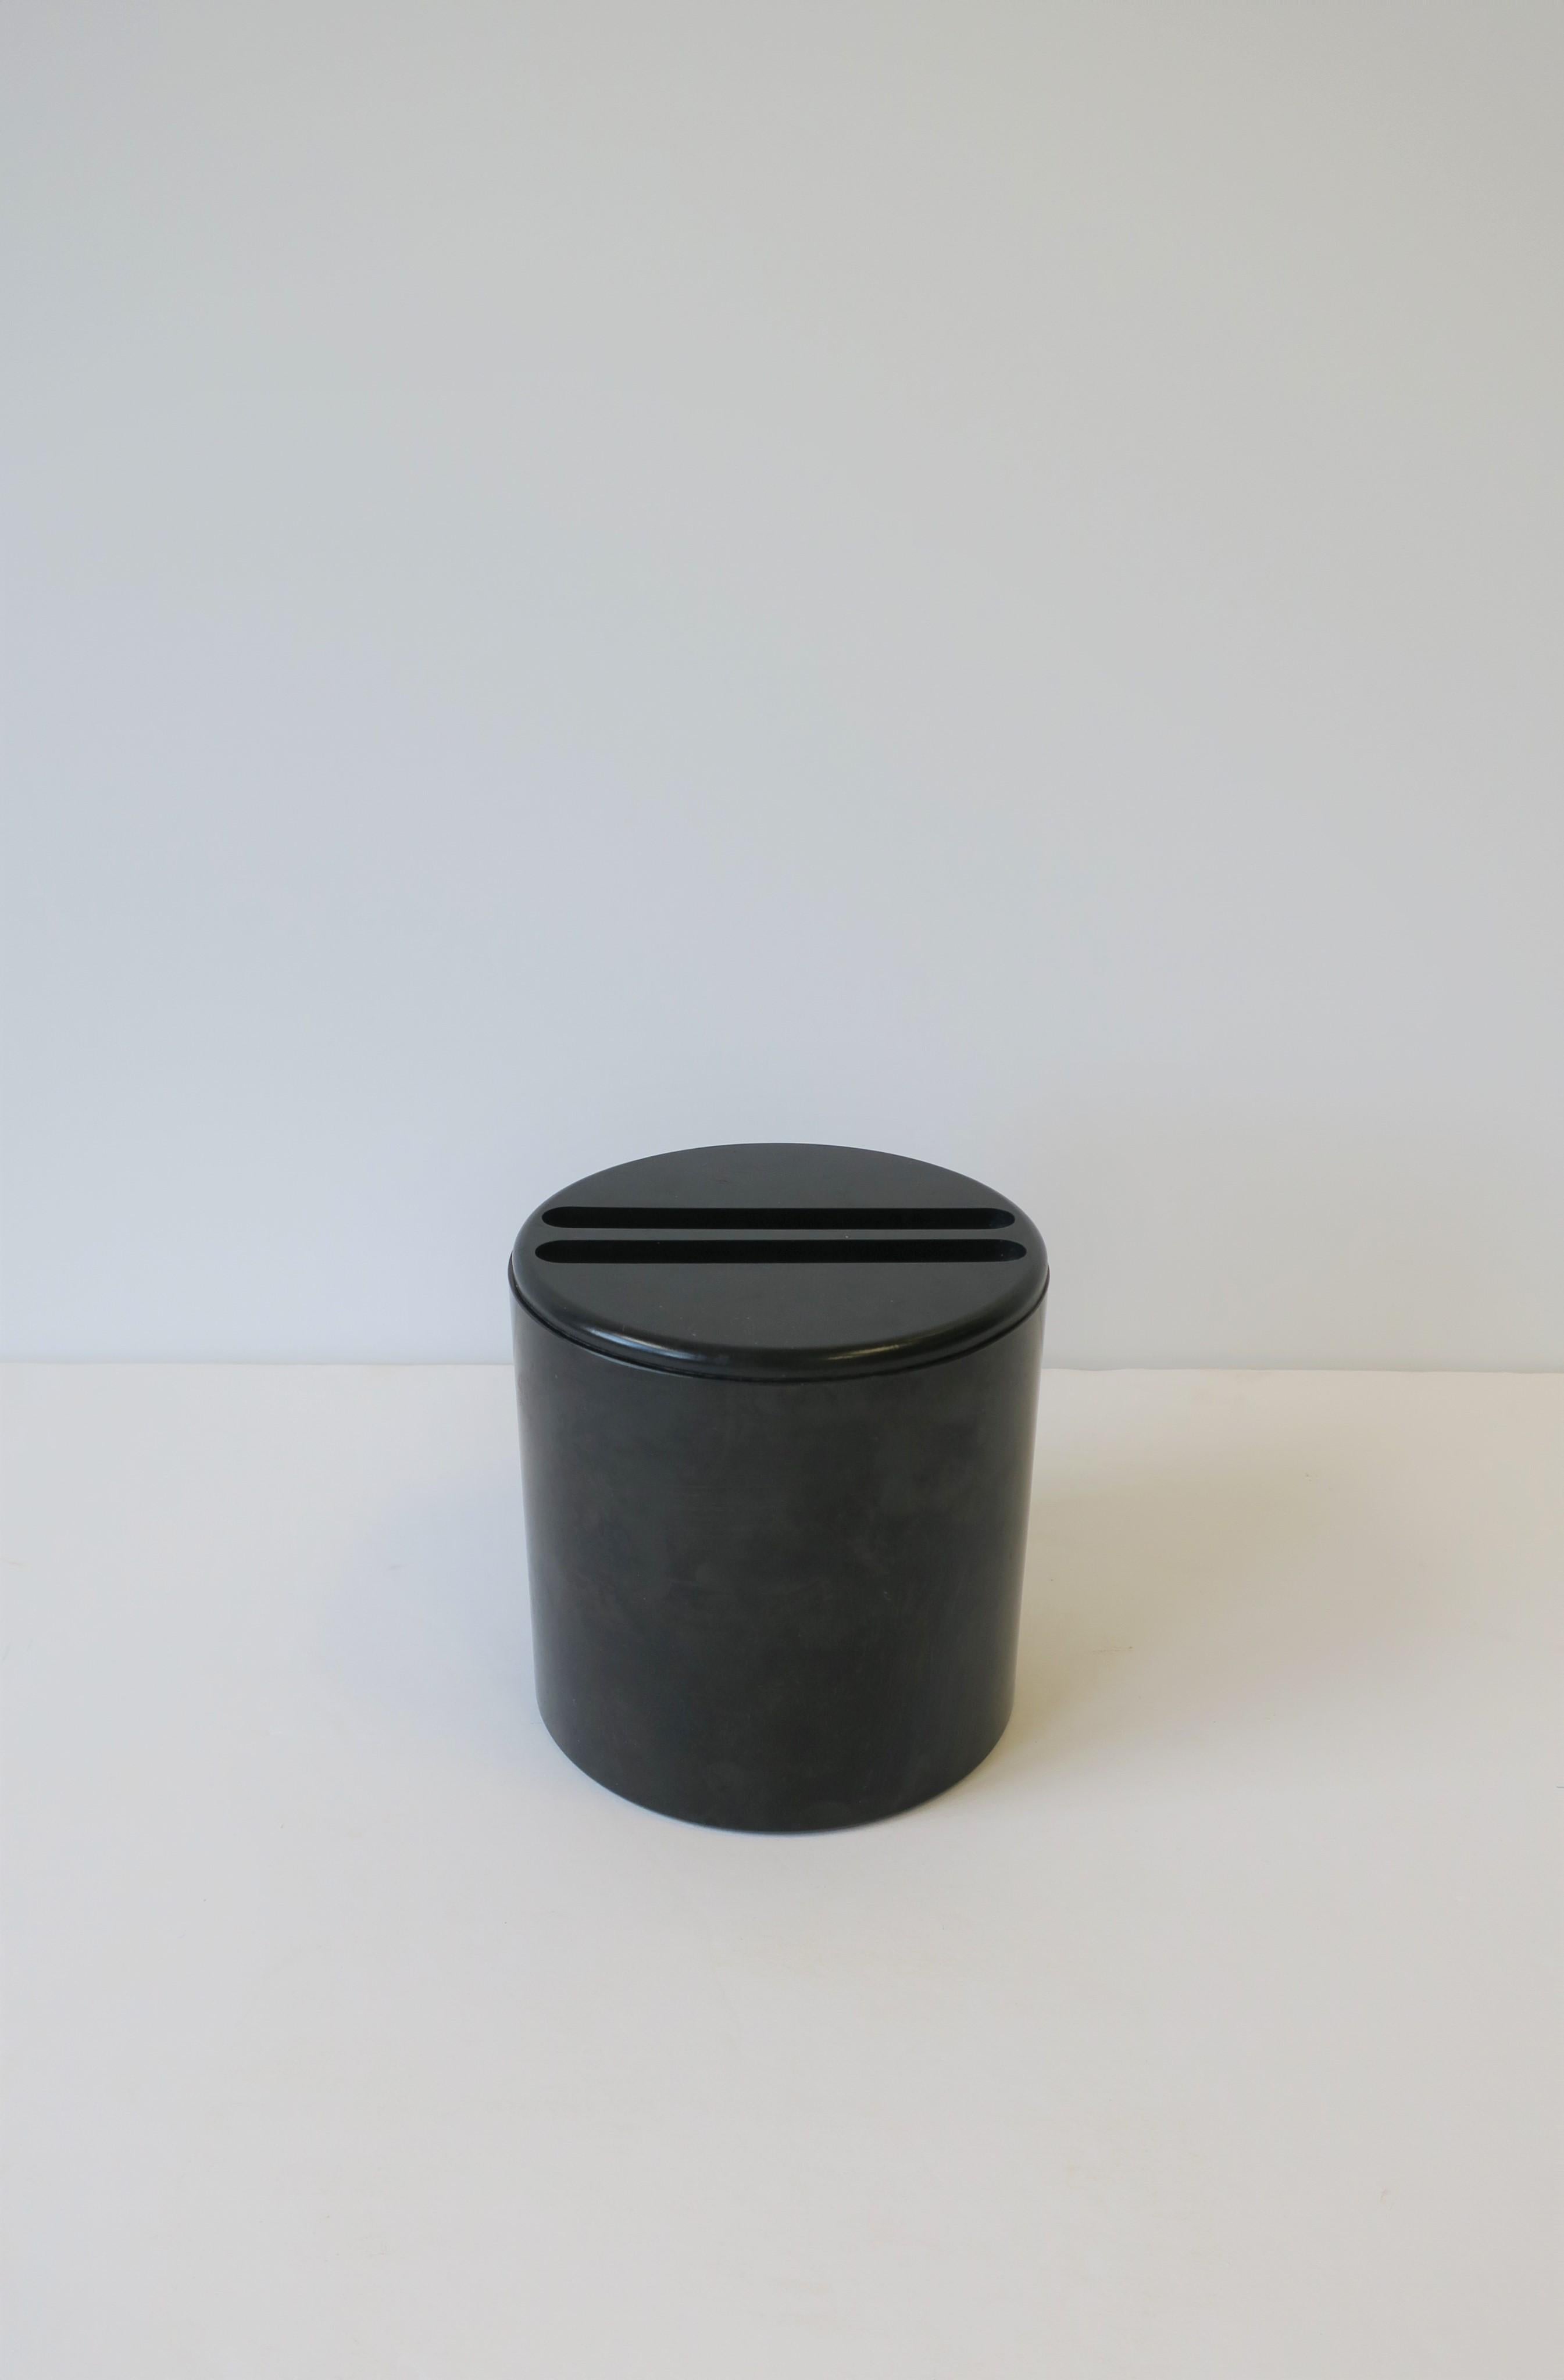 A black Postmodern period Italian round cylindrical vessel box by architect and designer G. F. 'Gianfranco' Frattini for Progetti, circa late-20th century, 1980s-1990s, Italy. A great piece for storage or as a standalone piece. With maker's mark on